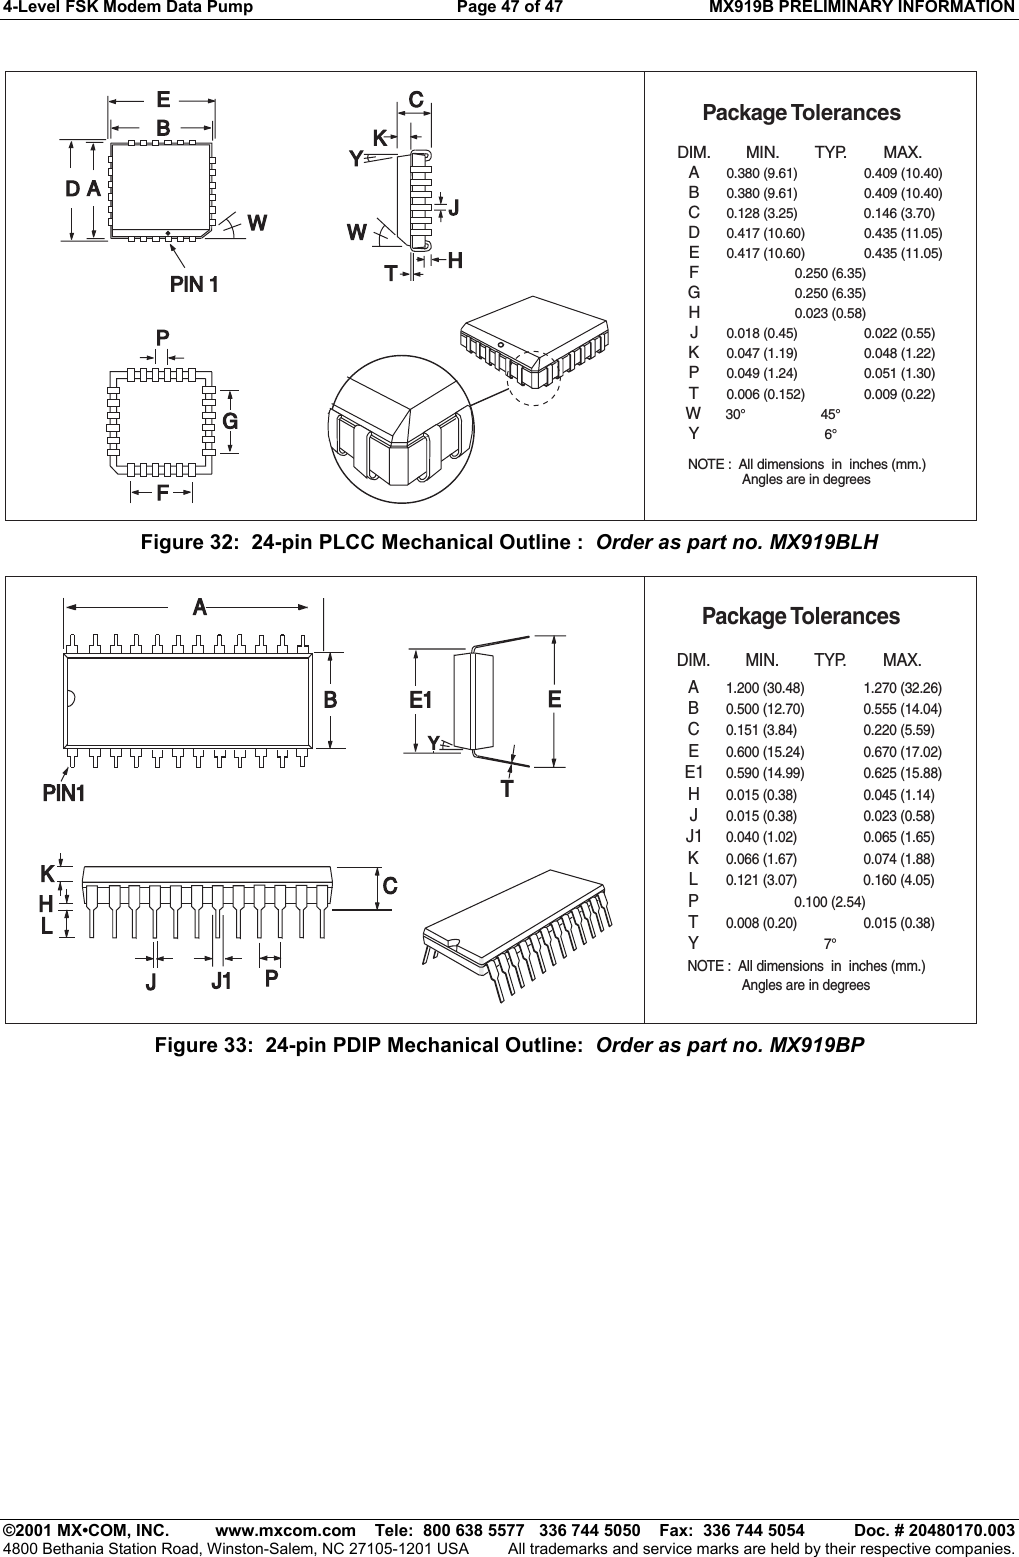 4-Level FSK Modem Data Pump  Page 47 of 47  MX919B PRELIMINARY INFORMATION   ©2001 MX•COM, INC.  www.mxcom.com    Tele:  800 638 5577   336 744 5050    Fax:  336 744 5054  Doc. # 20480170.003 4800 Bethania Station Road, Winston-Salem, NC 27105-1201 USA  All trademarks and service marks are held by their respective companies.  Package TolerancesNOTE : All dimensions  in inches (mm.)Angles are in degreesABCDEHPFGTYP. MAX.MIN.DIM.KJWTY0.435 (11.05)0.435 (11.05)0.051 (1.30)0.009 (0.22)6°30°0.409 (10.40)0.409 (10.40)0.146 (3.70)0.417 (10.60)0.417 (10.60)0.049 (1.24)0.006 (0.152)0.250 (6.35)0.250 (6.35)0.023 (0.58)0.047 (1.19)0.022 (0.55)0.018 (0.45)0.380 (9.61)0.380 (9.61)0.128 (3.25)0.048 (1.22)45°FGPADBEPIN 1WCJKYWHT Figure 32:  24-pin PLCC Mechanical Outline :  Order as part no. MX919BLH NOTE : All dimensions  in inches (mm.)Angles are in degreesPackage TolerancesABCEE1HTYP. MAX.MIN.DIM.JJ1PYTKL0.220 (5.59)0.555 (14.04)0.670 (17.02)7°0.160 (4.05)1.270 (32.26)0.151 (3.84)0.100 (2.54)0.121 (3.07)0.600 (15.24)0.590 (14.99) 0.625 (15.88)0.015 (0.38) 0.045 (1.14)0.008 (0.20) 0.015 (0.38)0.015 (0.38) 0.023 (0.58)0.040 (1.02) 0.065 (1.65)0.066 (1.67) 0.074 (1.88)1.200 (30.48)0.500 (12.70)HKLJ1JPCBAPIN1 TEE1Y Figure 33:  24-pin PDIP Mechanical Outline:  Order as part no. MX919BP 